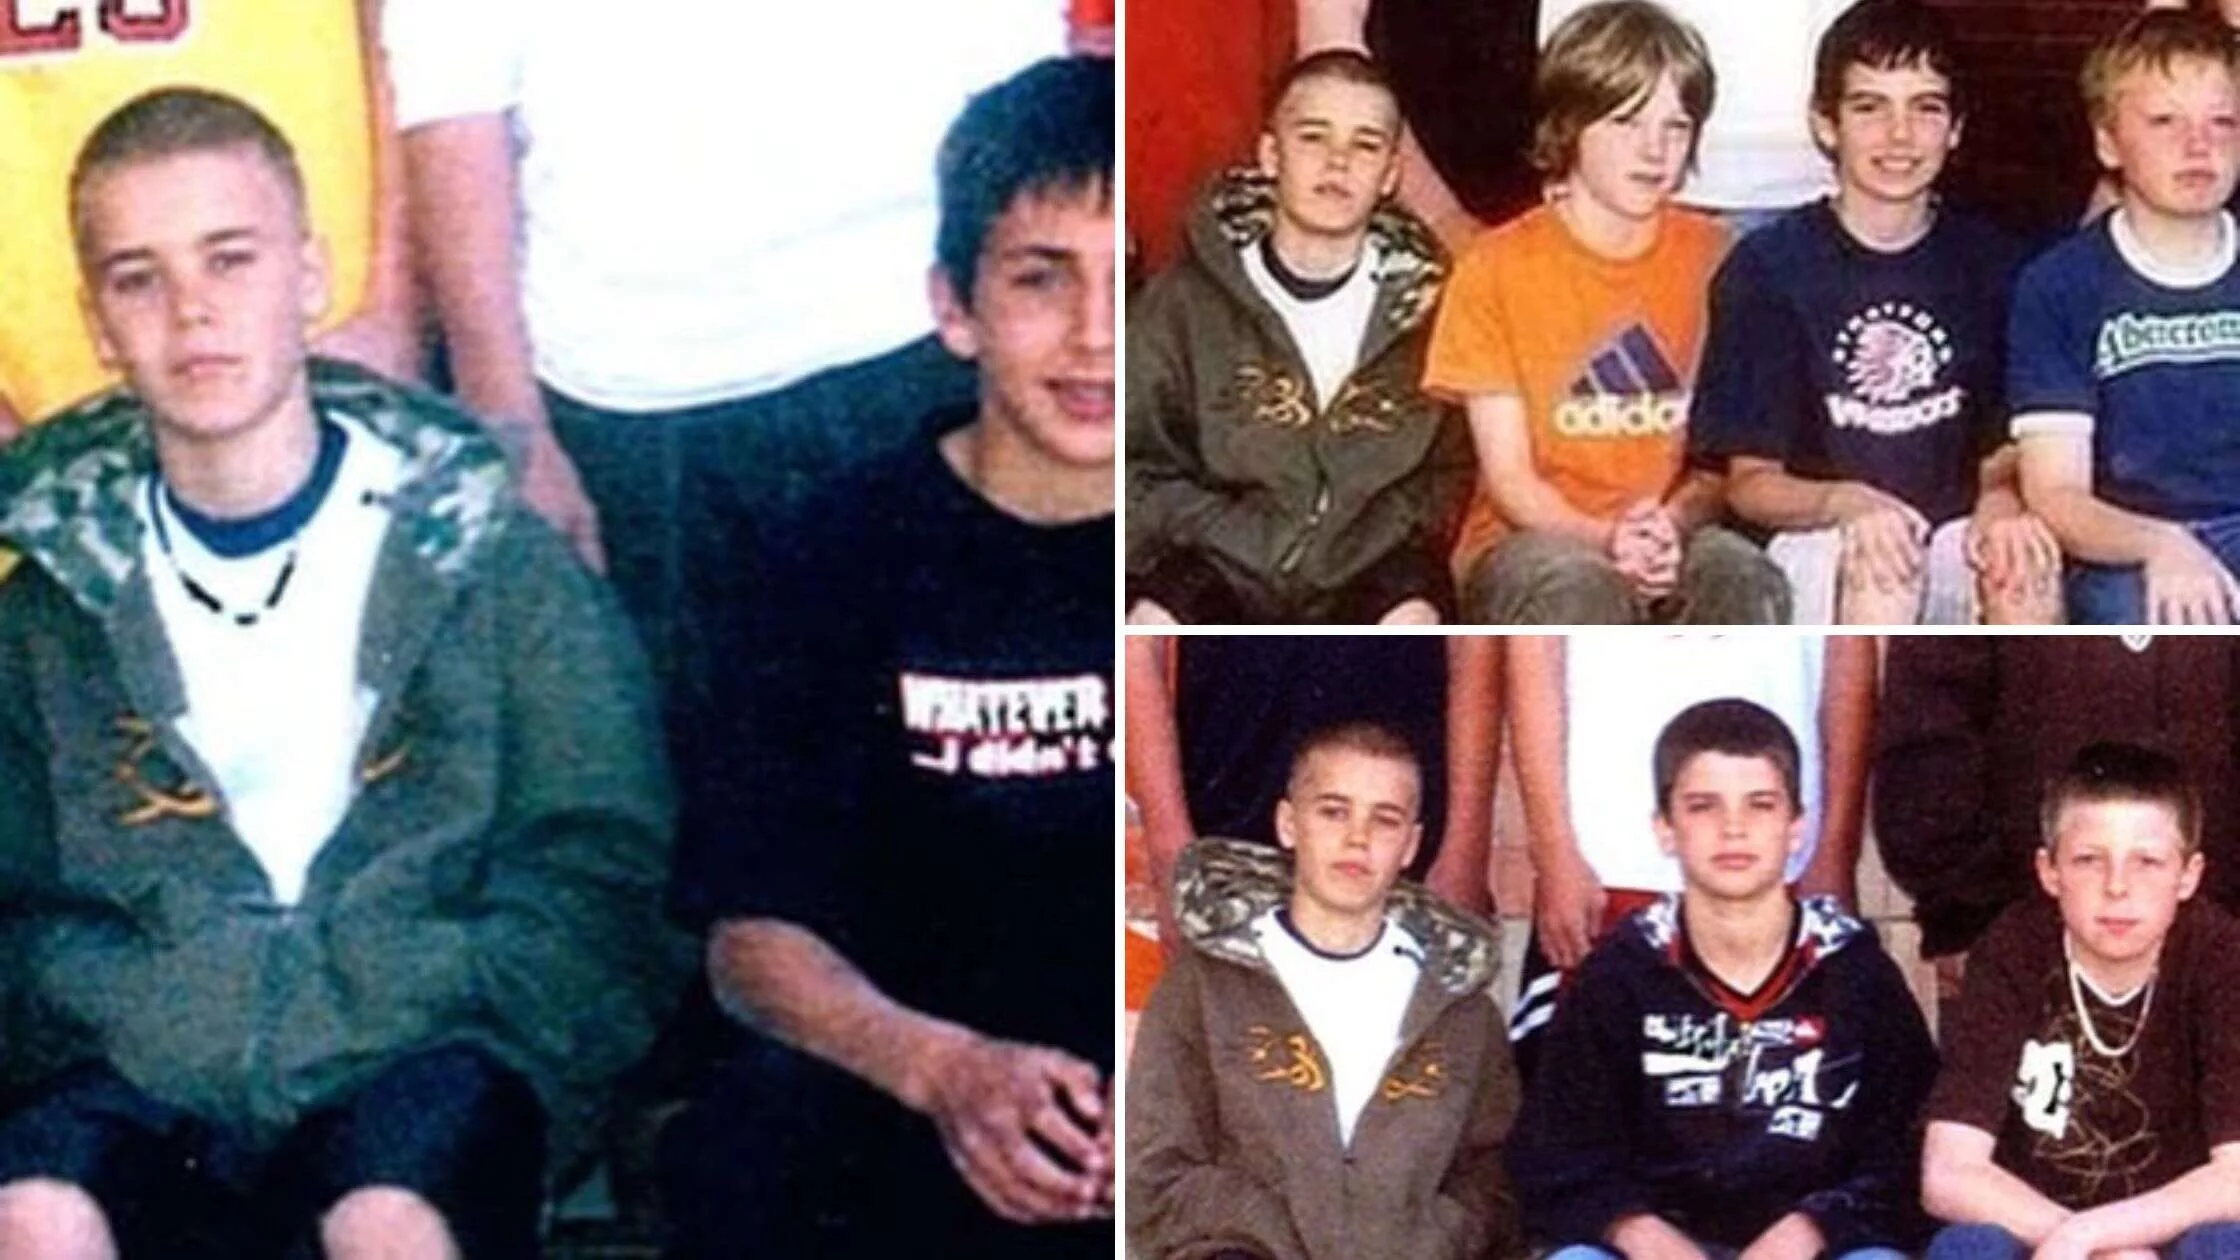 Justin with his childhood friends